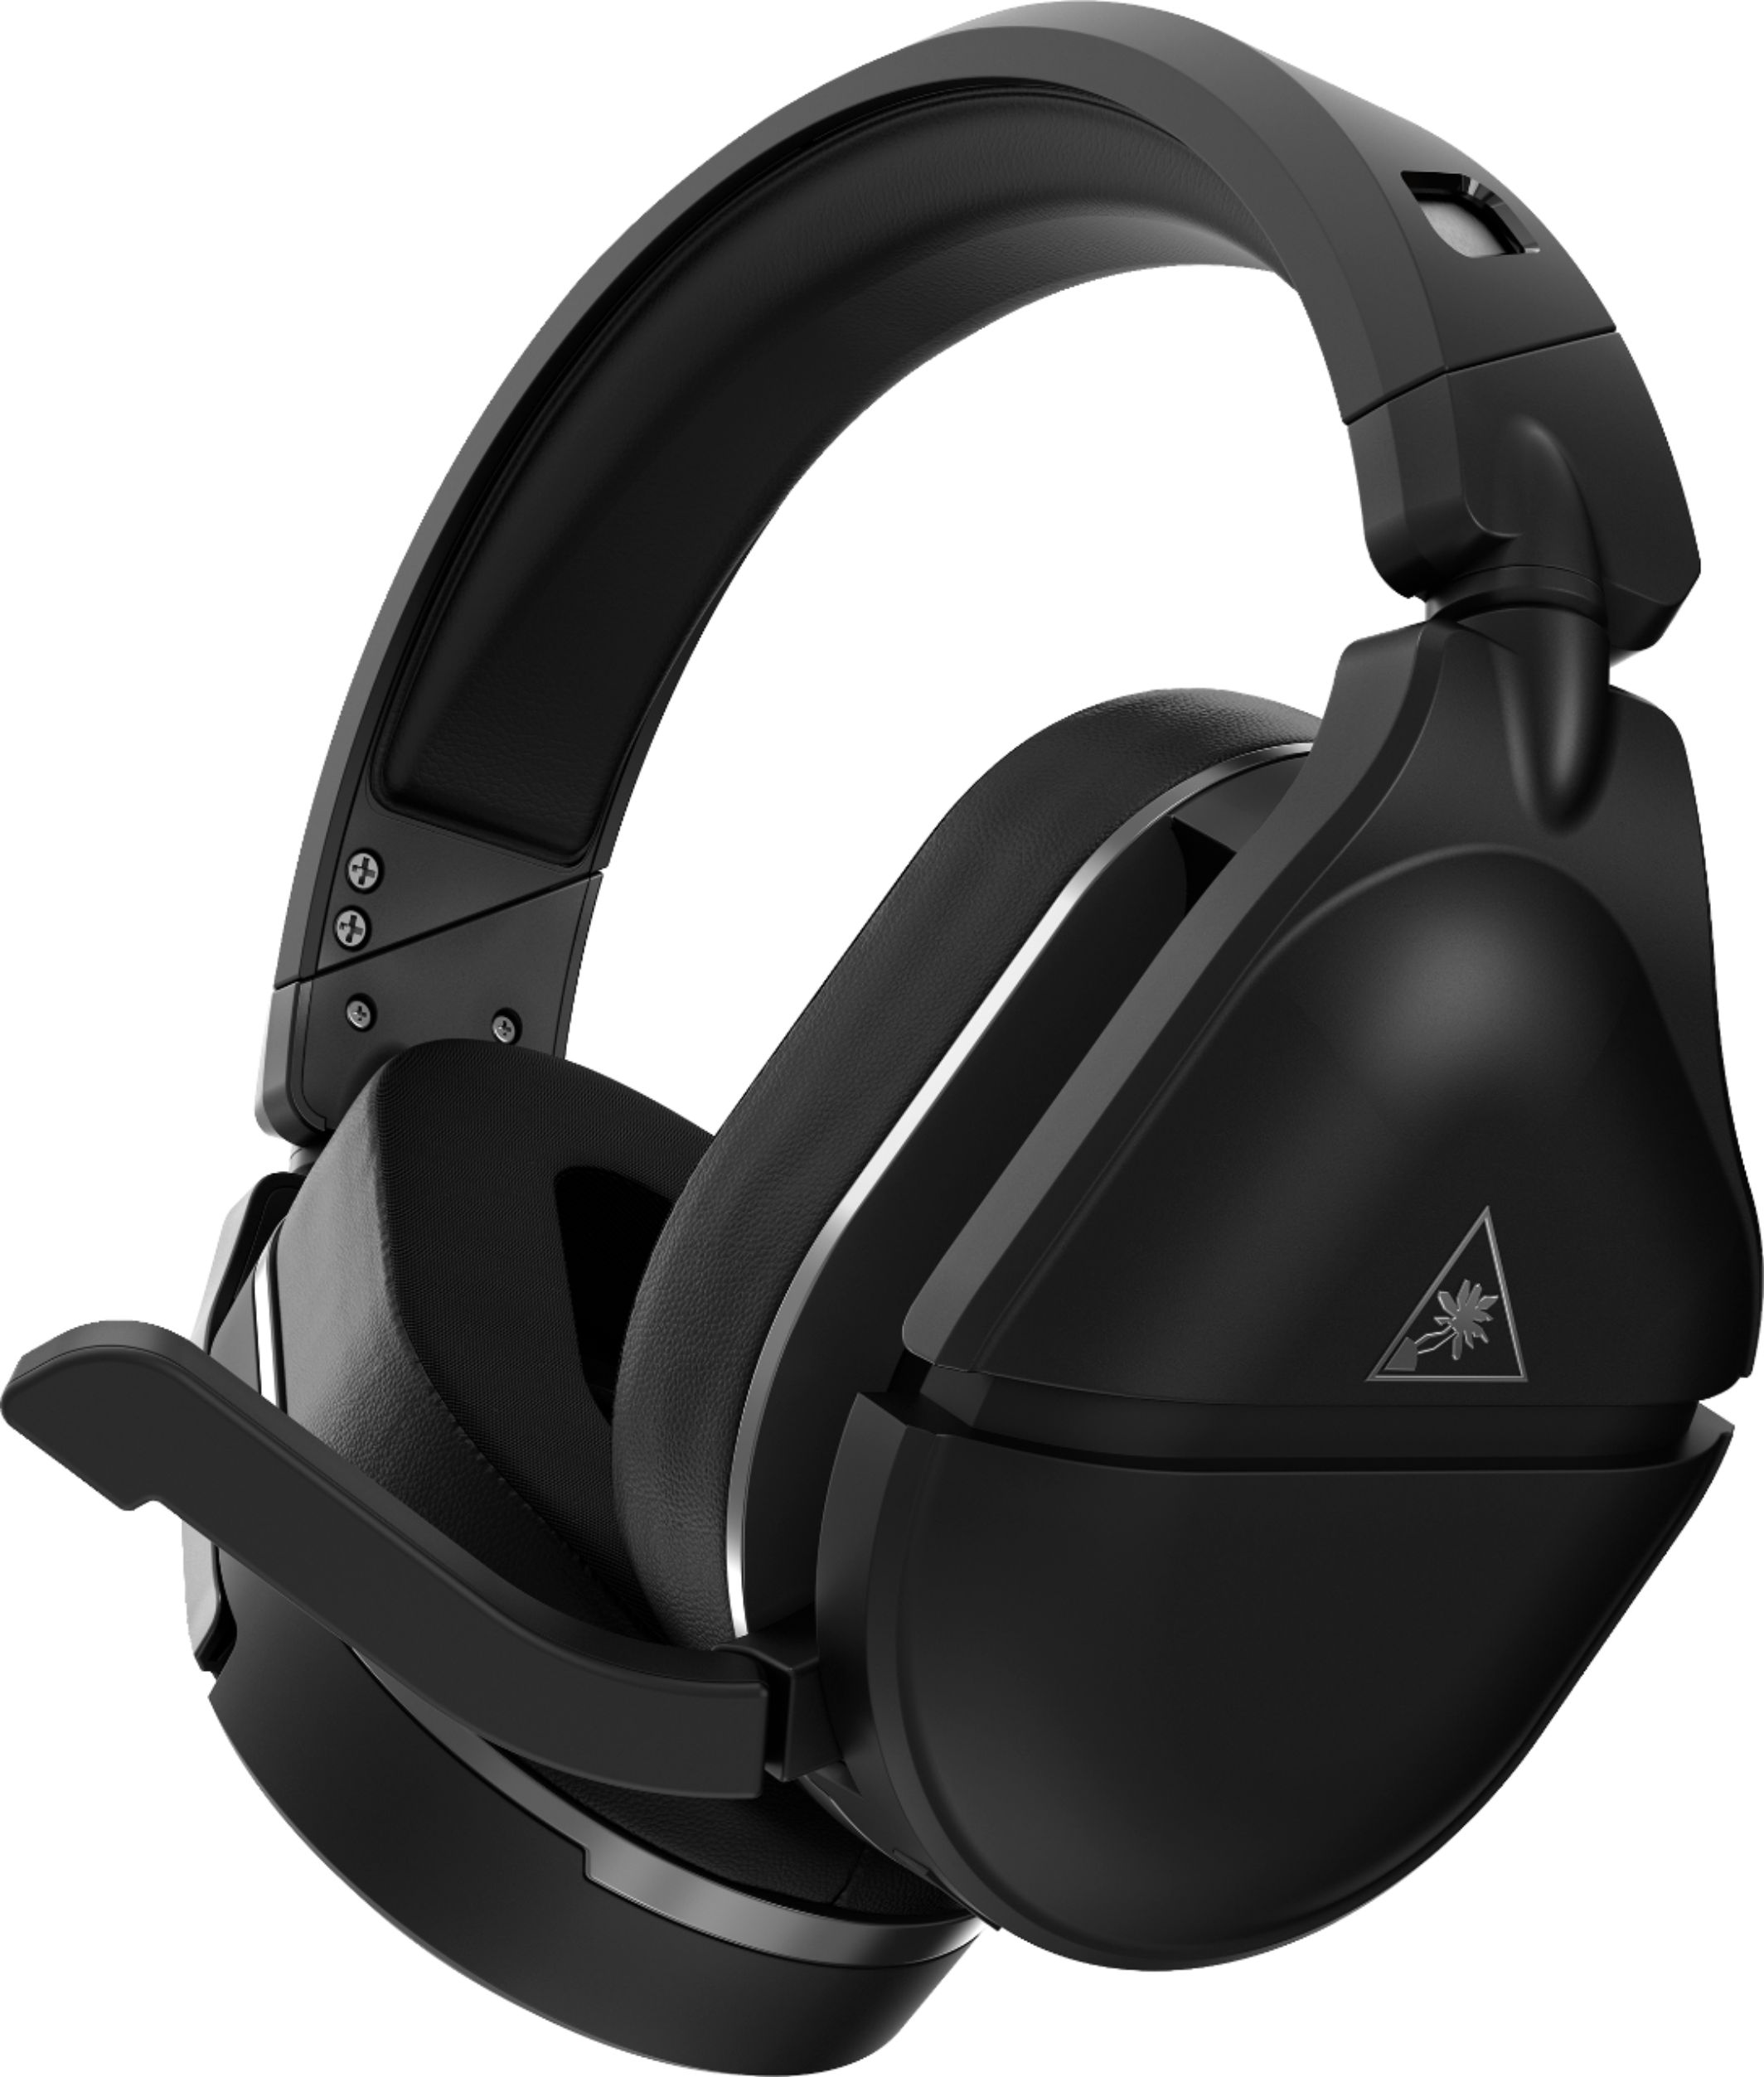 nedadgående sygdom Forfølge Turtle Beach Stealth 700 Gen 2 Wireless Gaming Headset Black for PlayStation  5, PlayStation 4 & Nintendo Switch with Bluetooth Black/Silver TBS-3780-01  - Best Buy